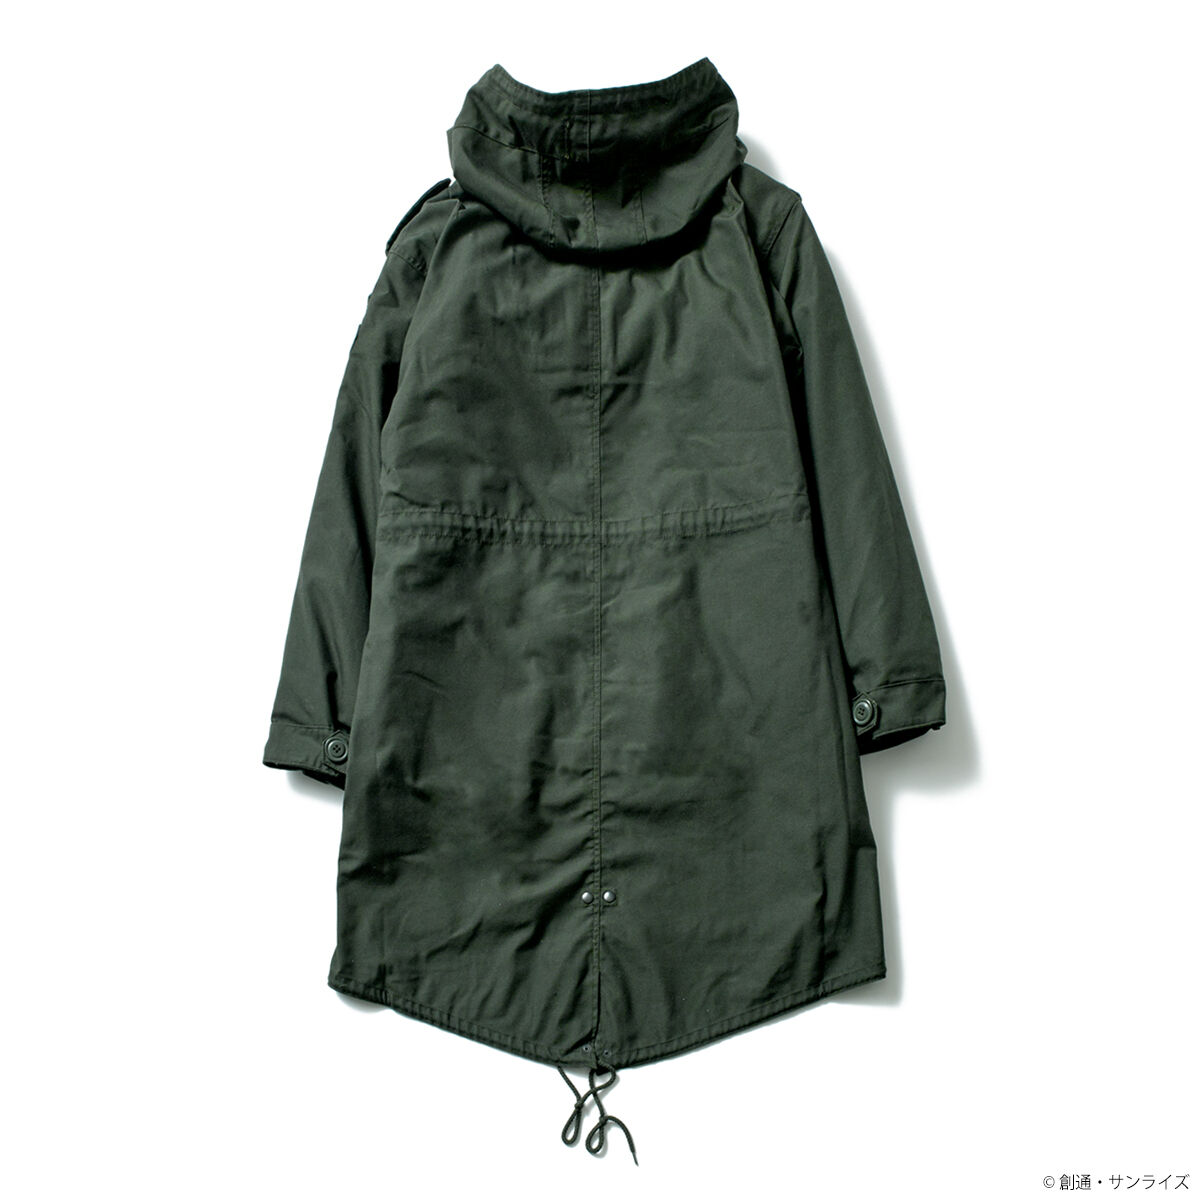 STRICT-G.ARMS Mobile Suit Gundam Zeon M-51 Hoodie